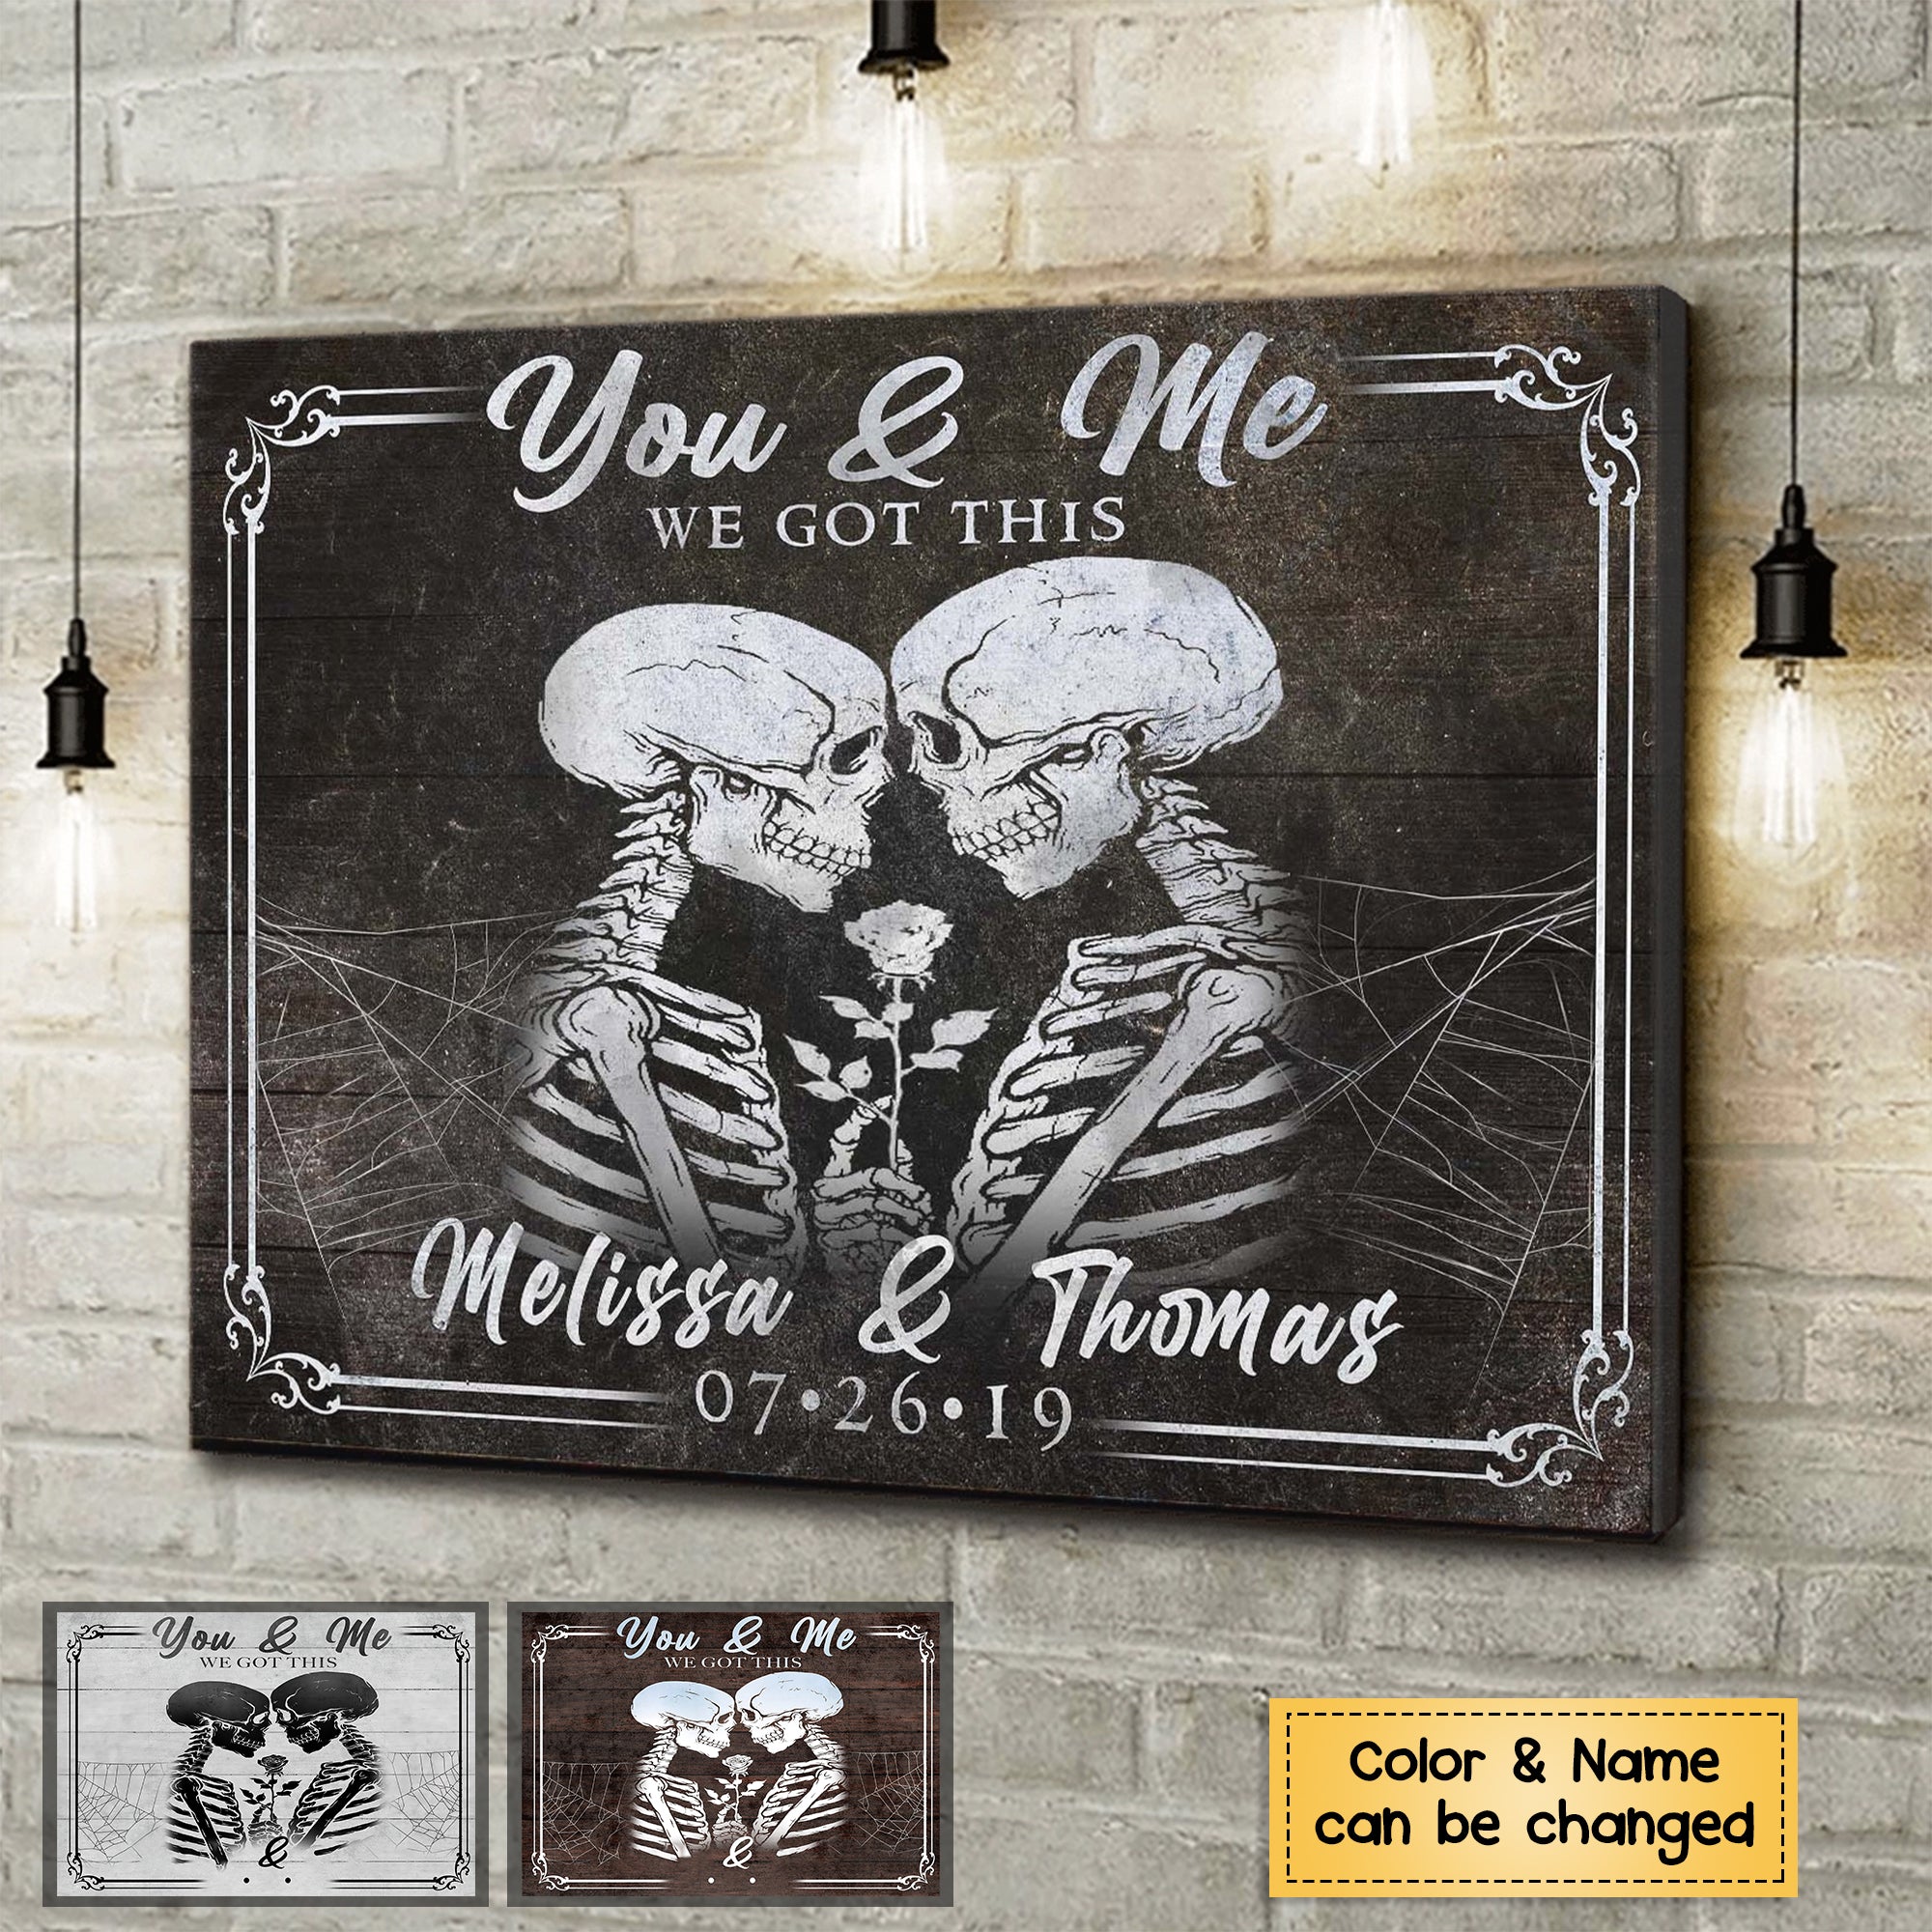 You & Me, We Got This - Personalized Gothic Skeleton Couple Poster